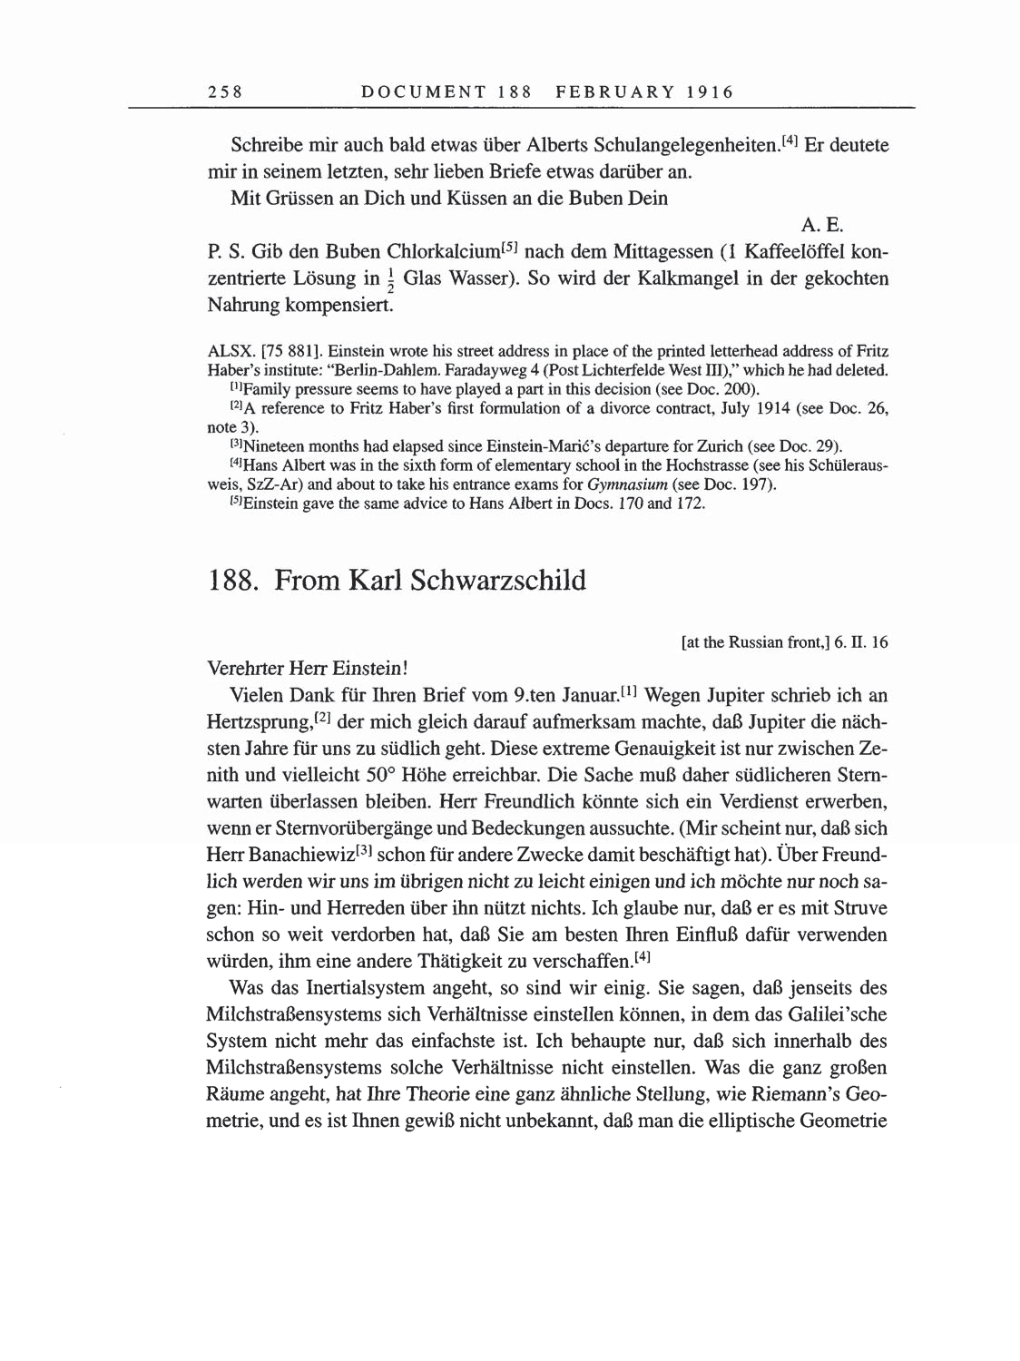 Volume 8, Part A: The Berlin Years: Correspondence 1914-1917 page 258